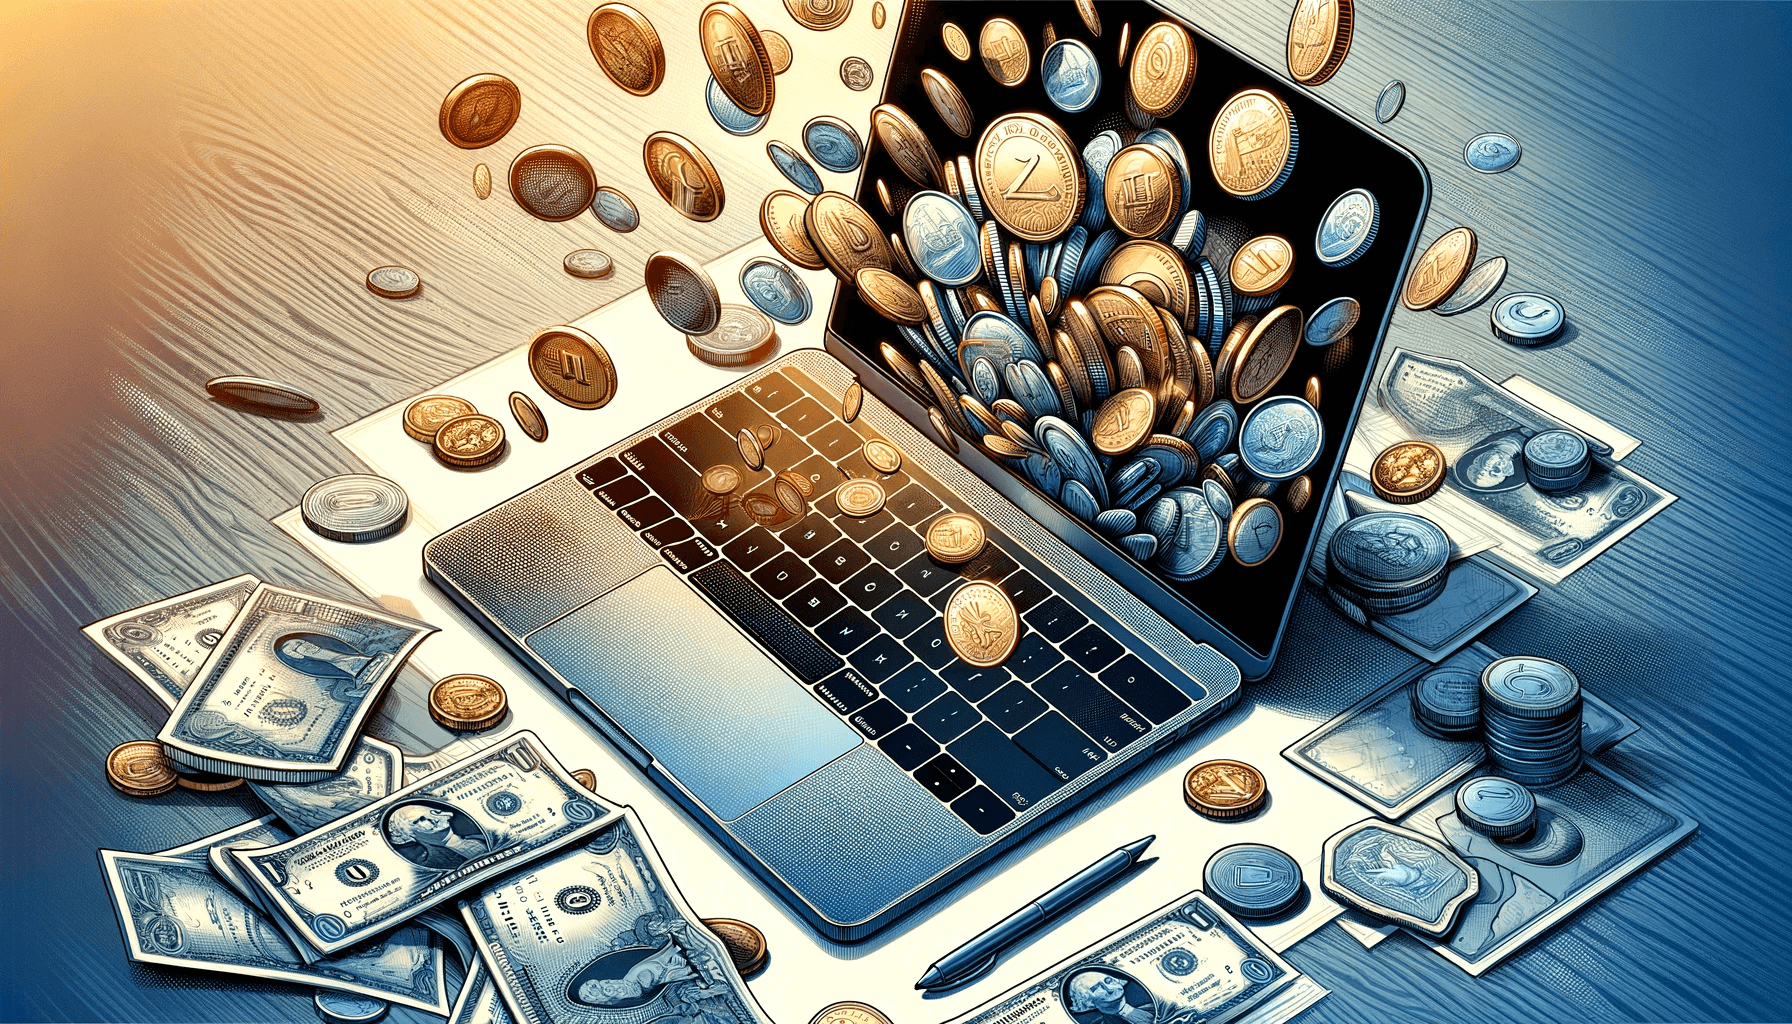 DALL·E 2023 11 23 15.28.56 A digital illustration of a MacBook with coins and bills in the background. The MacBook is depicted open on a desk showcasing its sleek design and cl 1